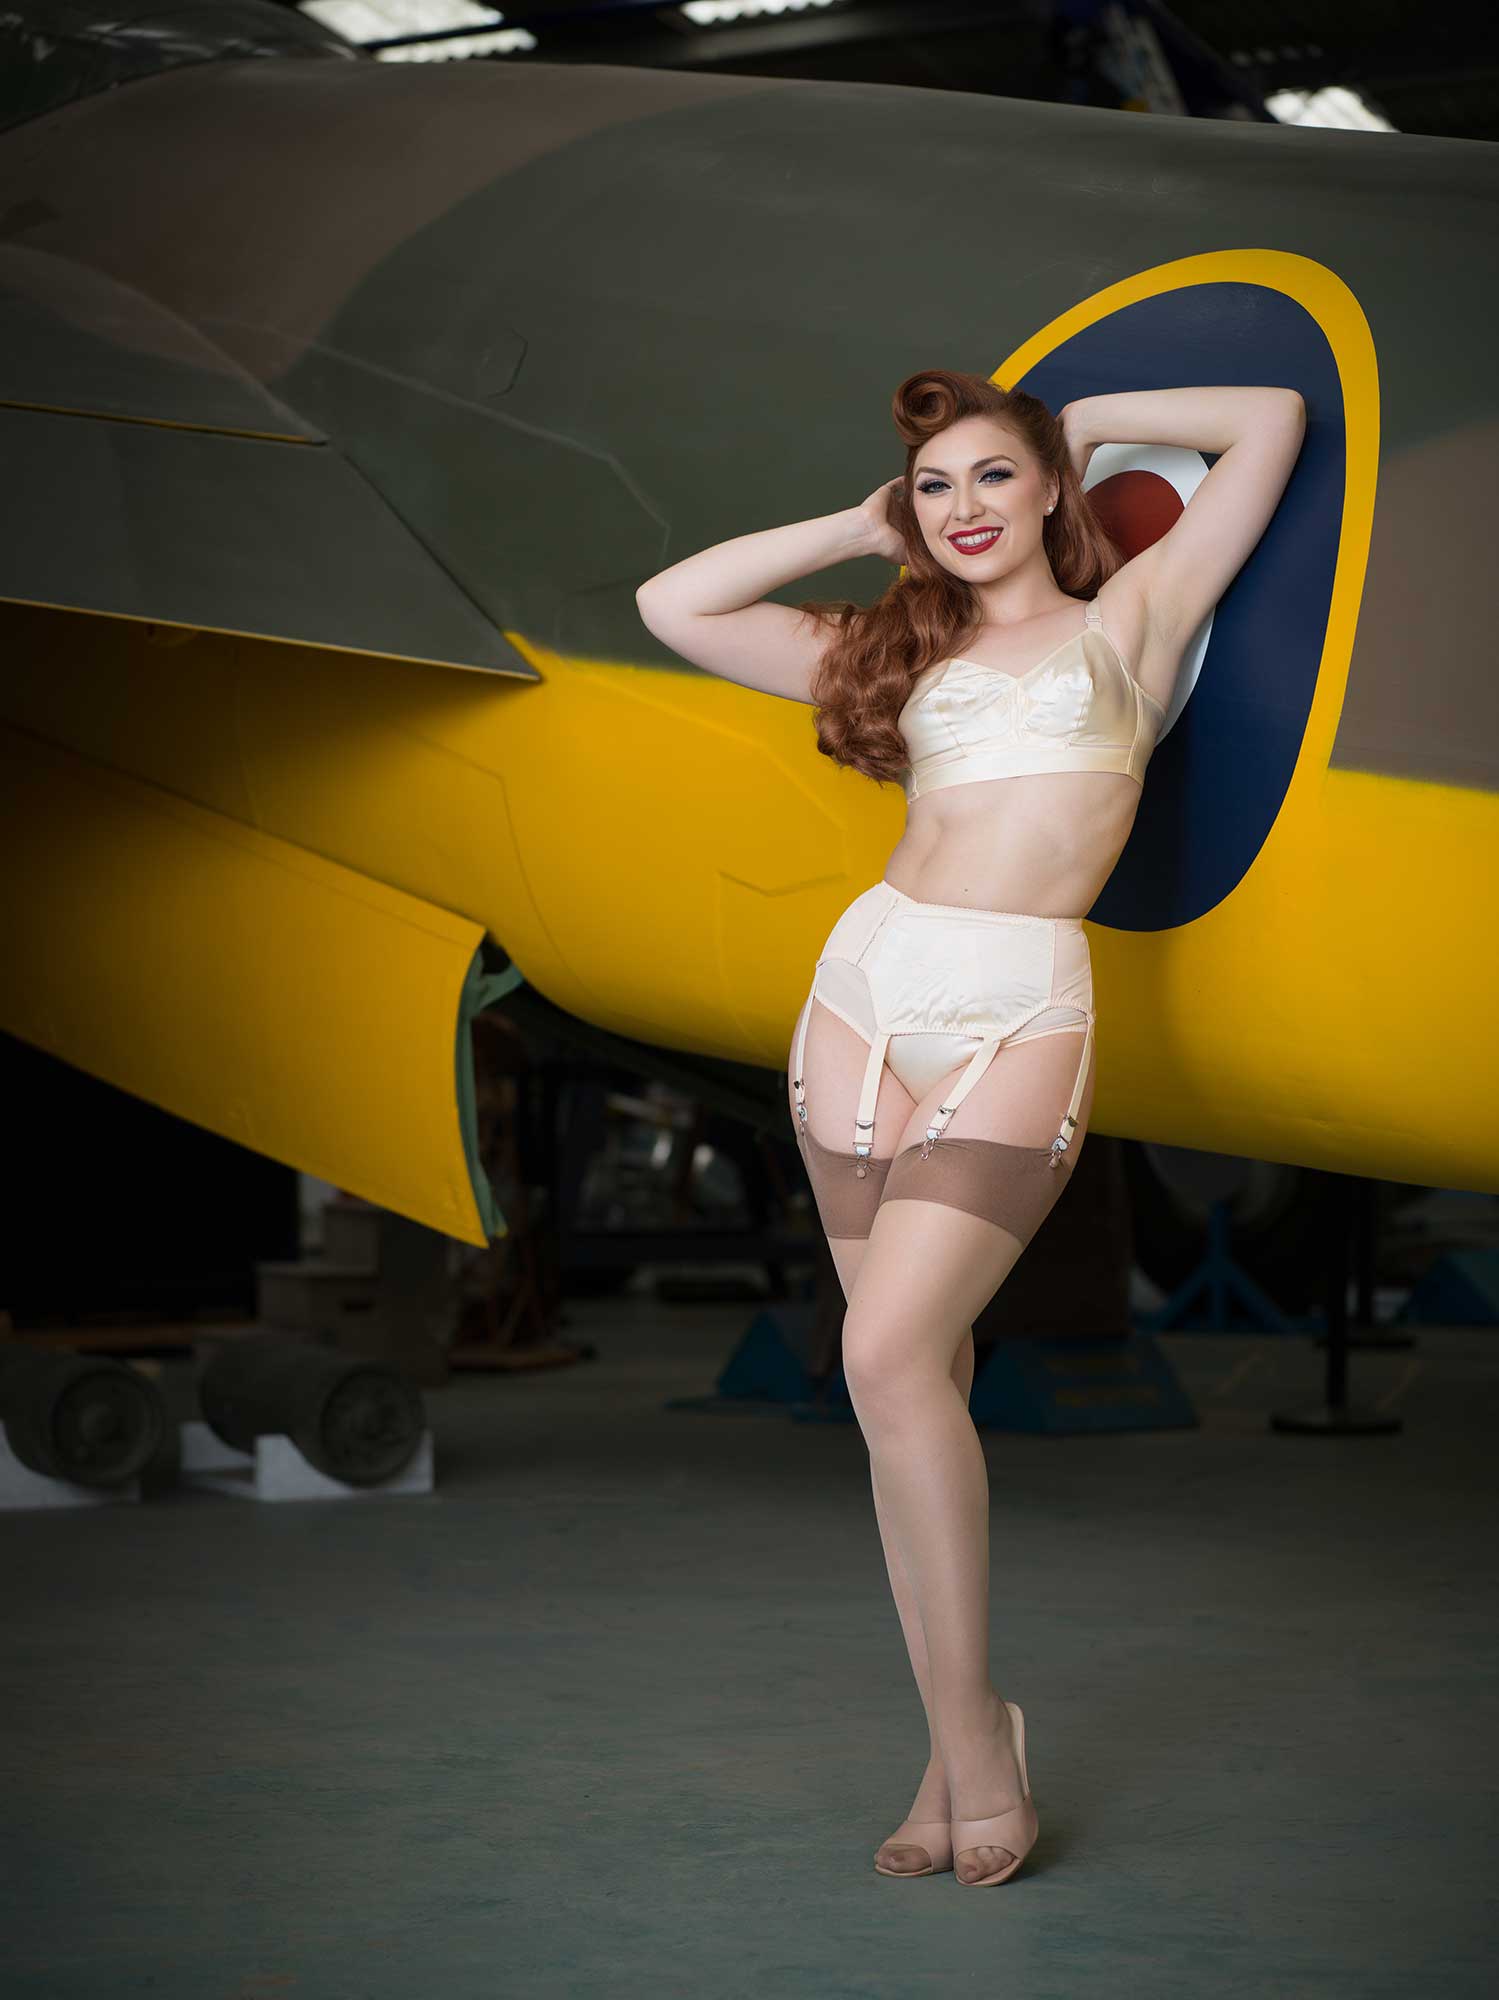 Vintage Pinup felicity Furore poses for Planes & Pinups: The Mosquito Photography Shoot Day with original de Havilland DH98 Mosquito prototype © Tigz Rice Ltd 2022. https://www.tigzrice.com